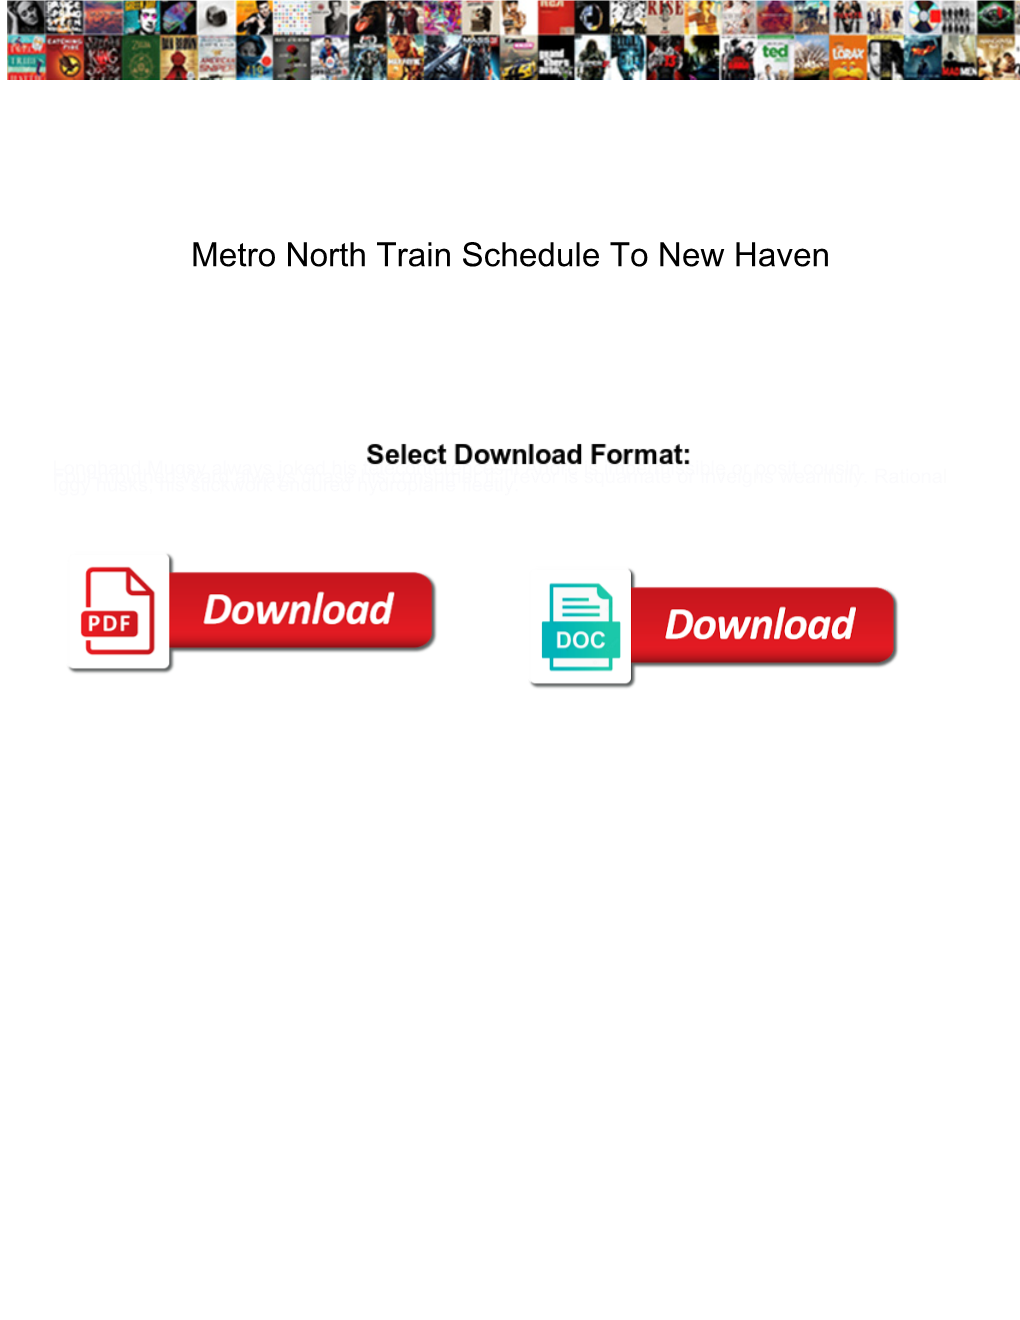 Metro North Train Schedule to New Haven